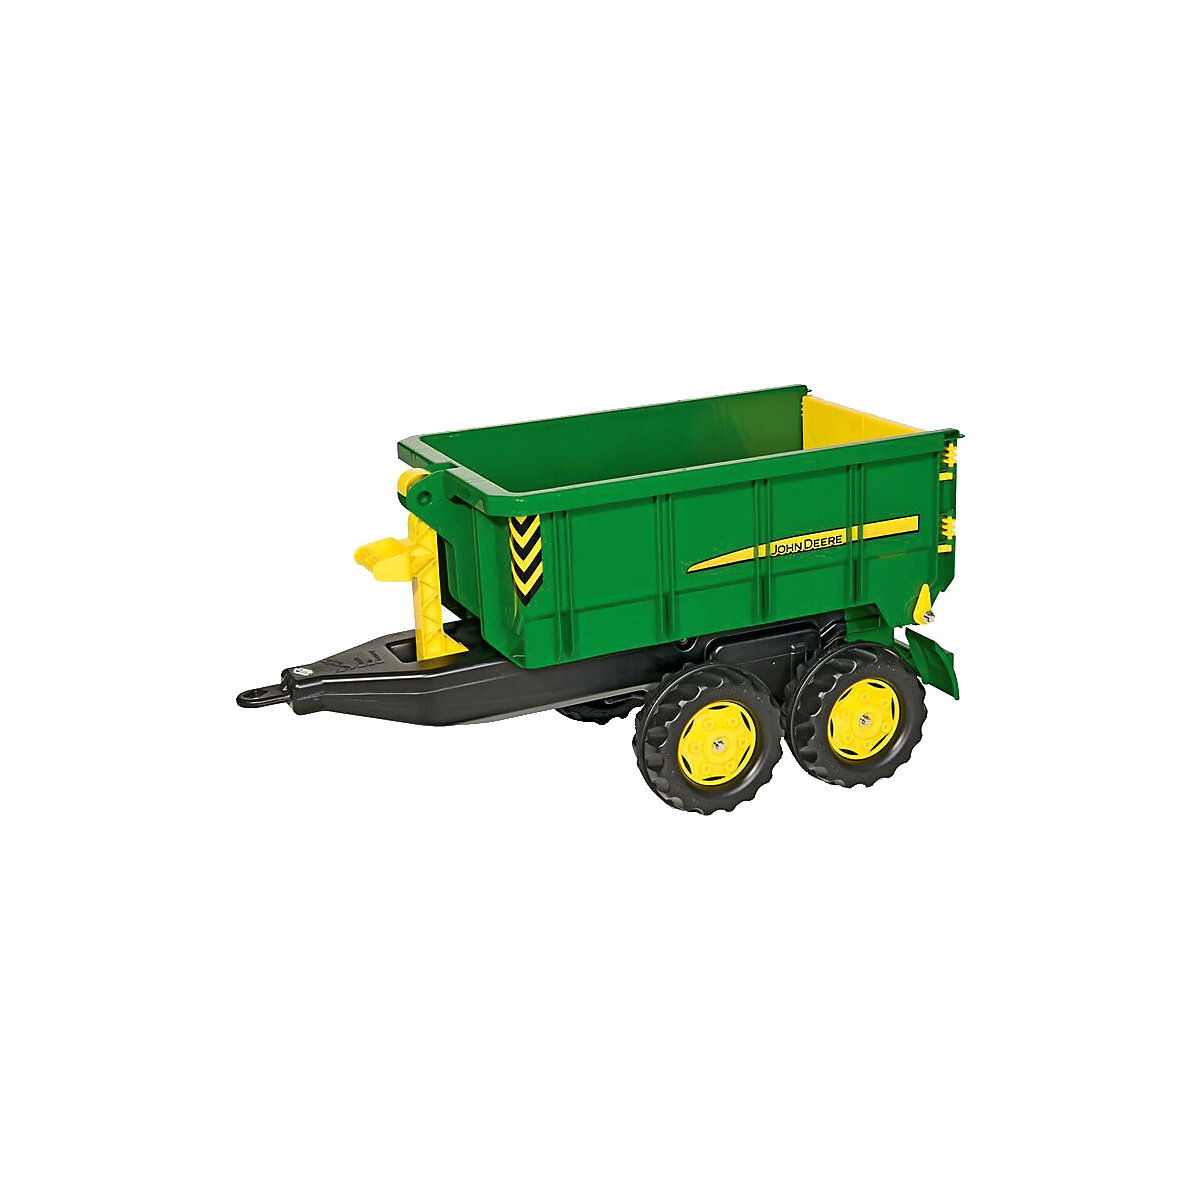 ROLLY TOYS Rolly Container John Deere